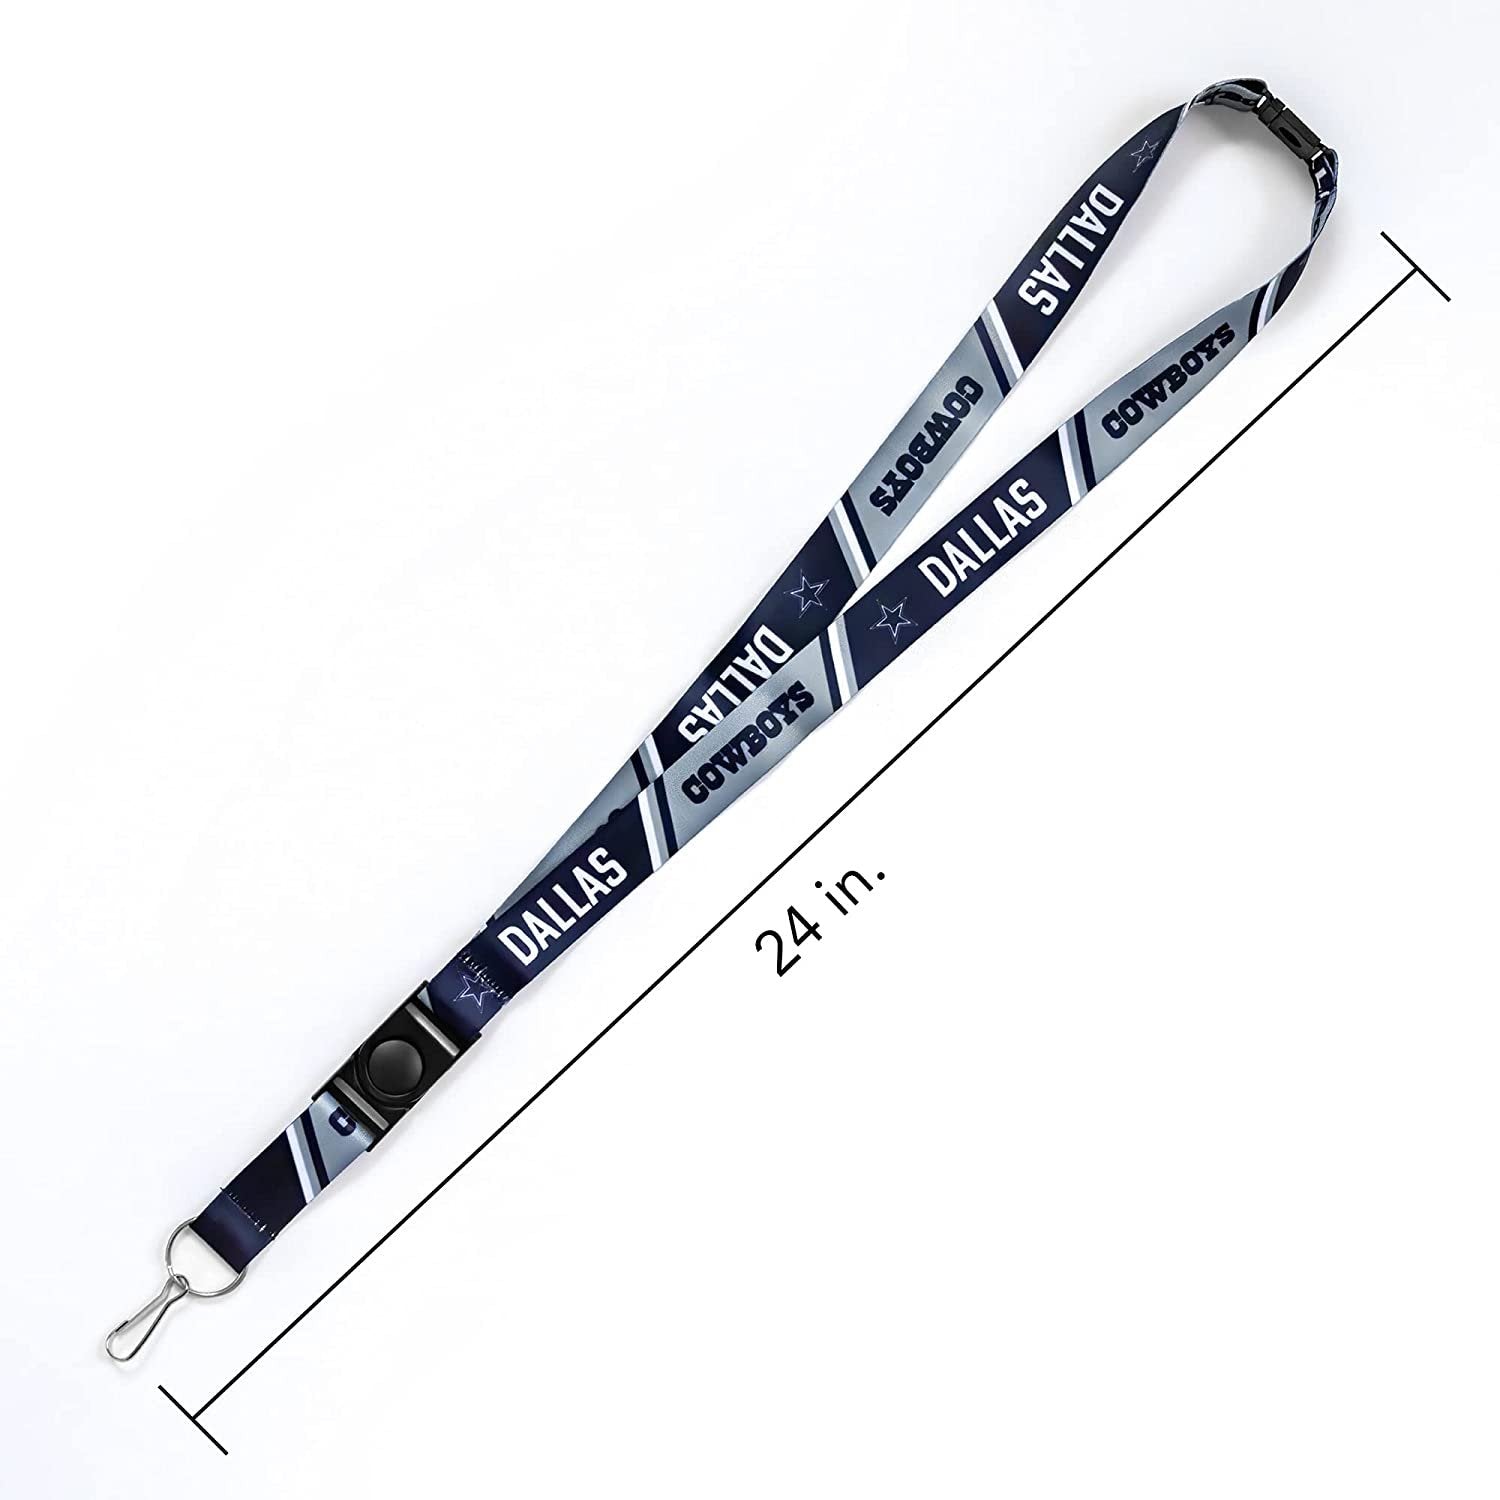 Brigham Young University Cougars BYU Wolfpack Lanyard Keychain Double Sided 18 Inch Button Clip Safety Breakaway